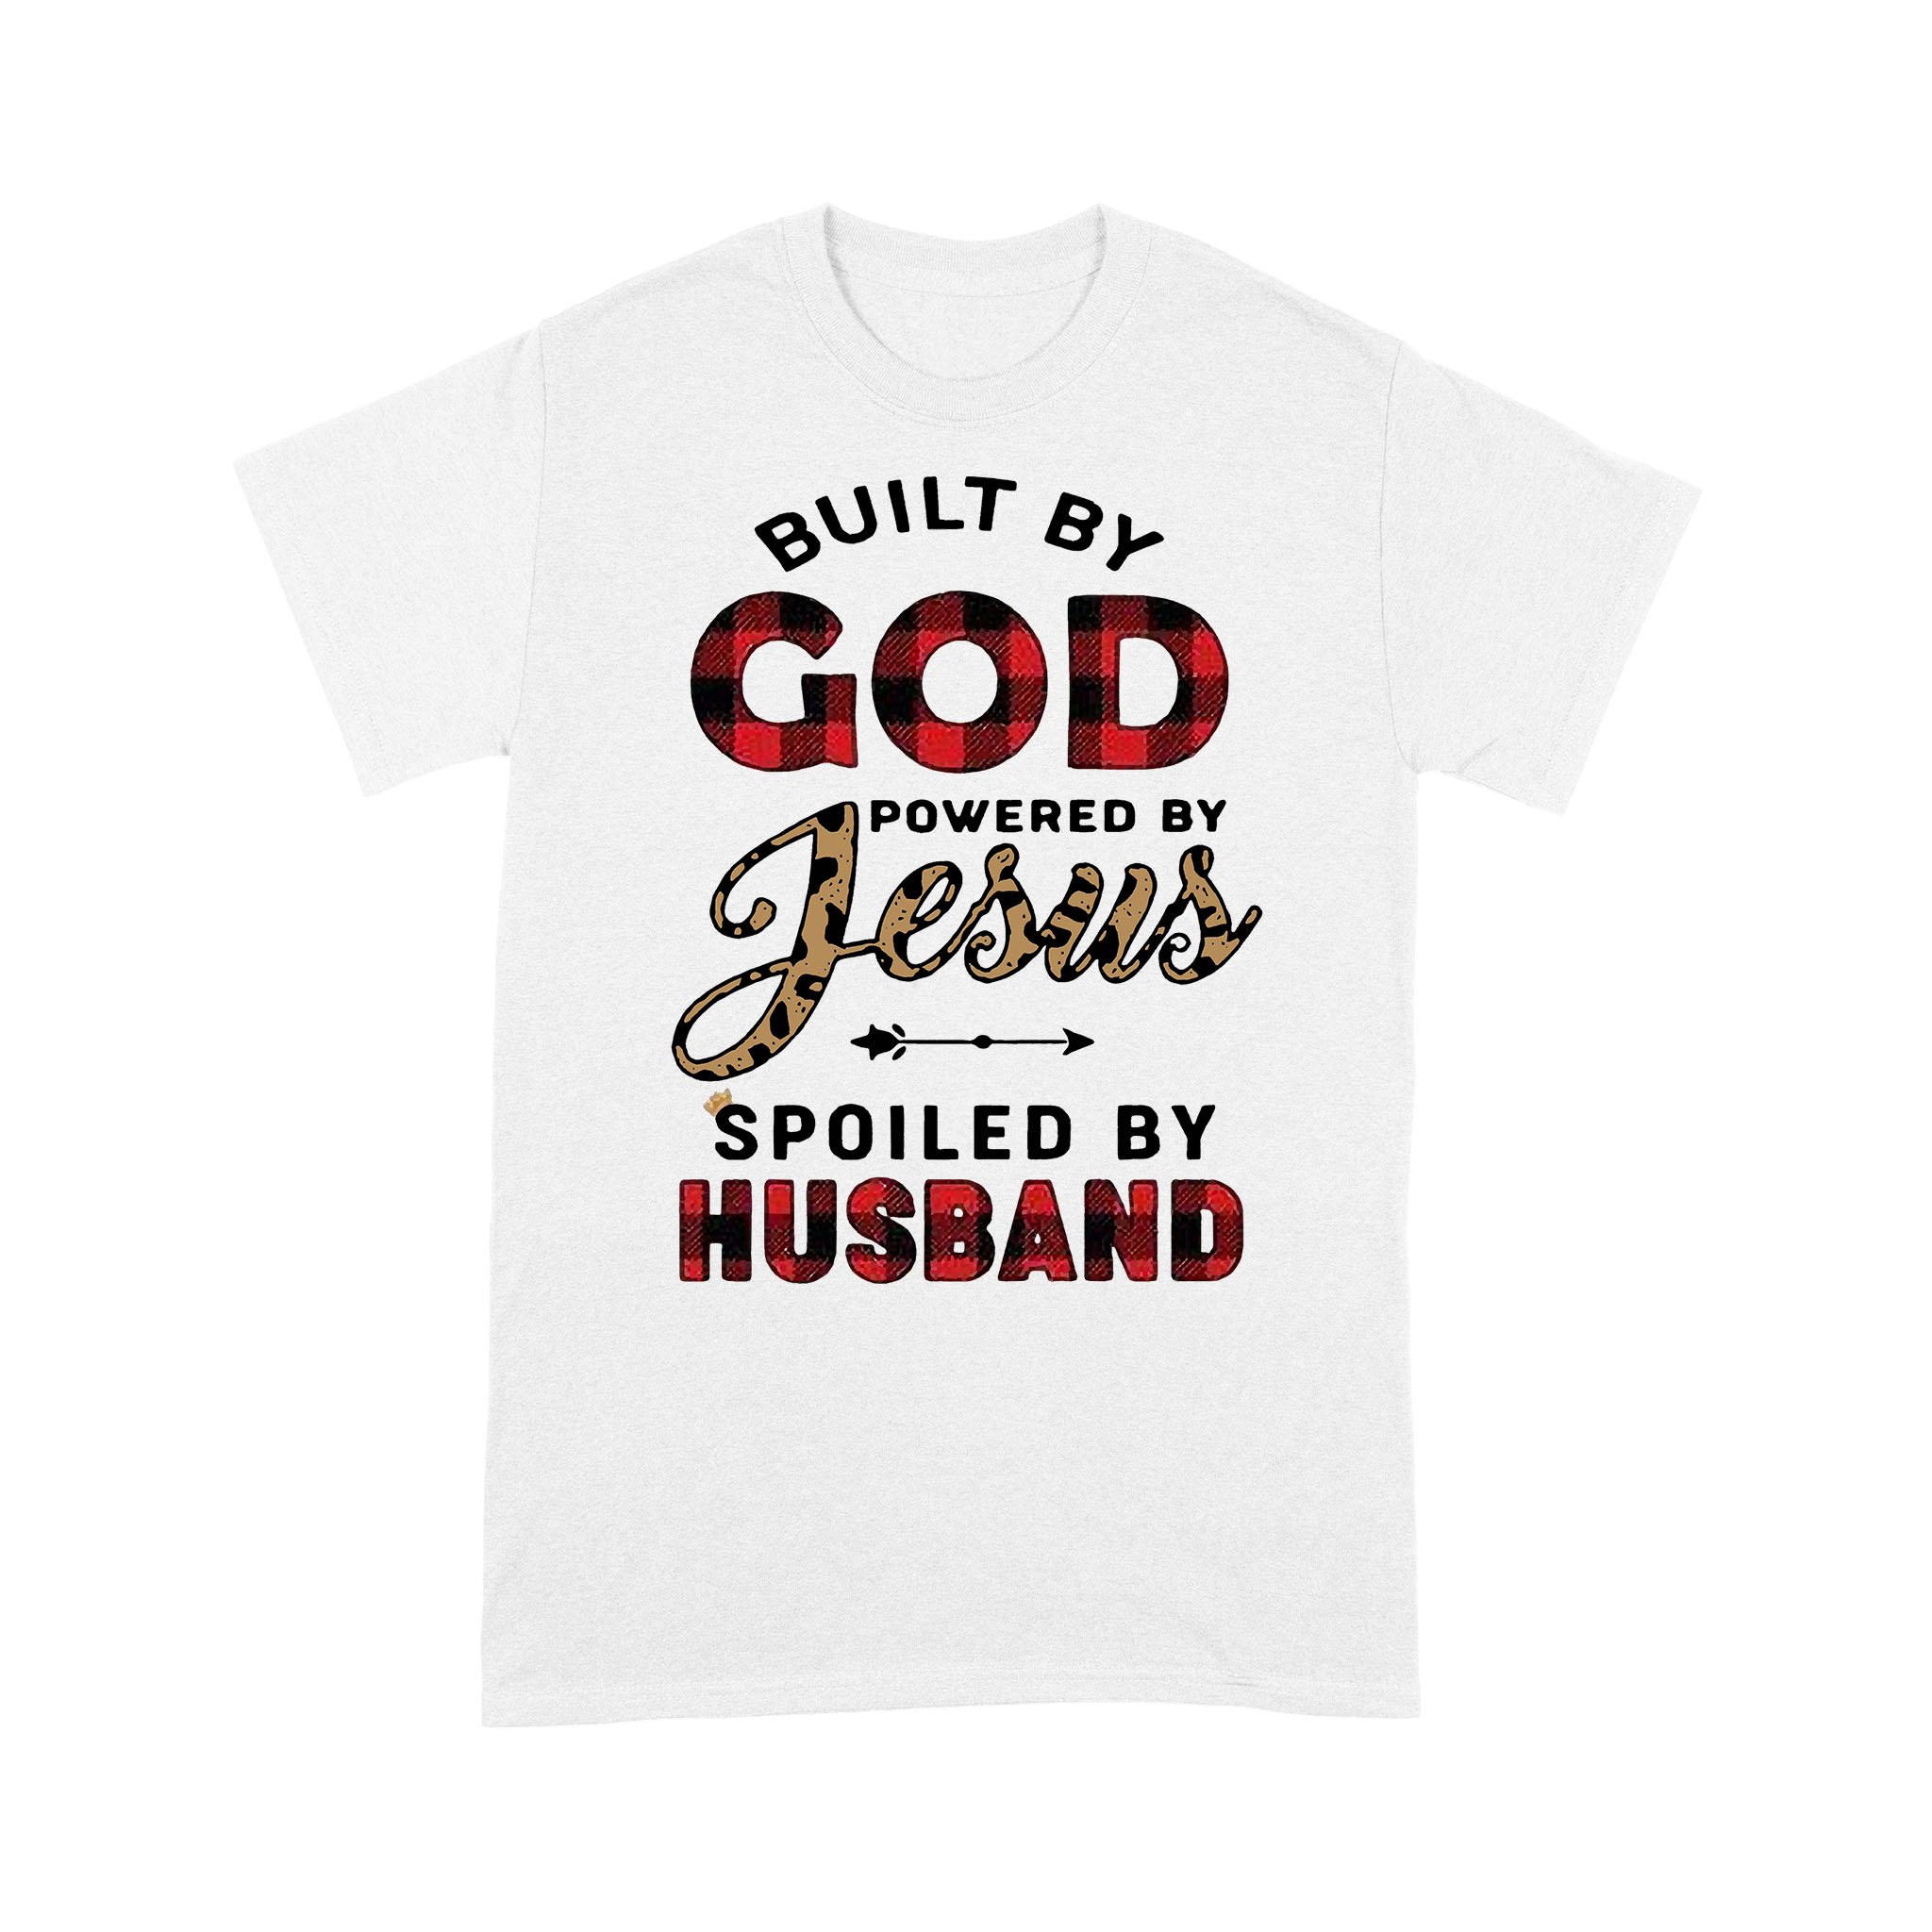 Built By God Powered By Jesus Spoiled By Husband T-shirt